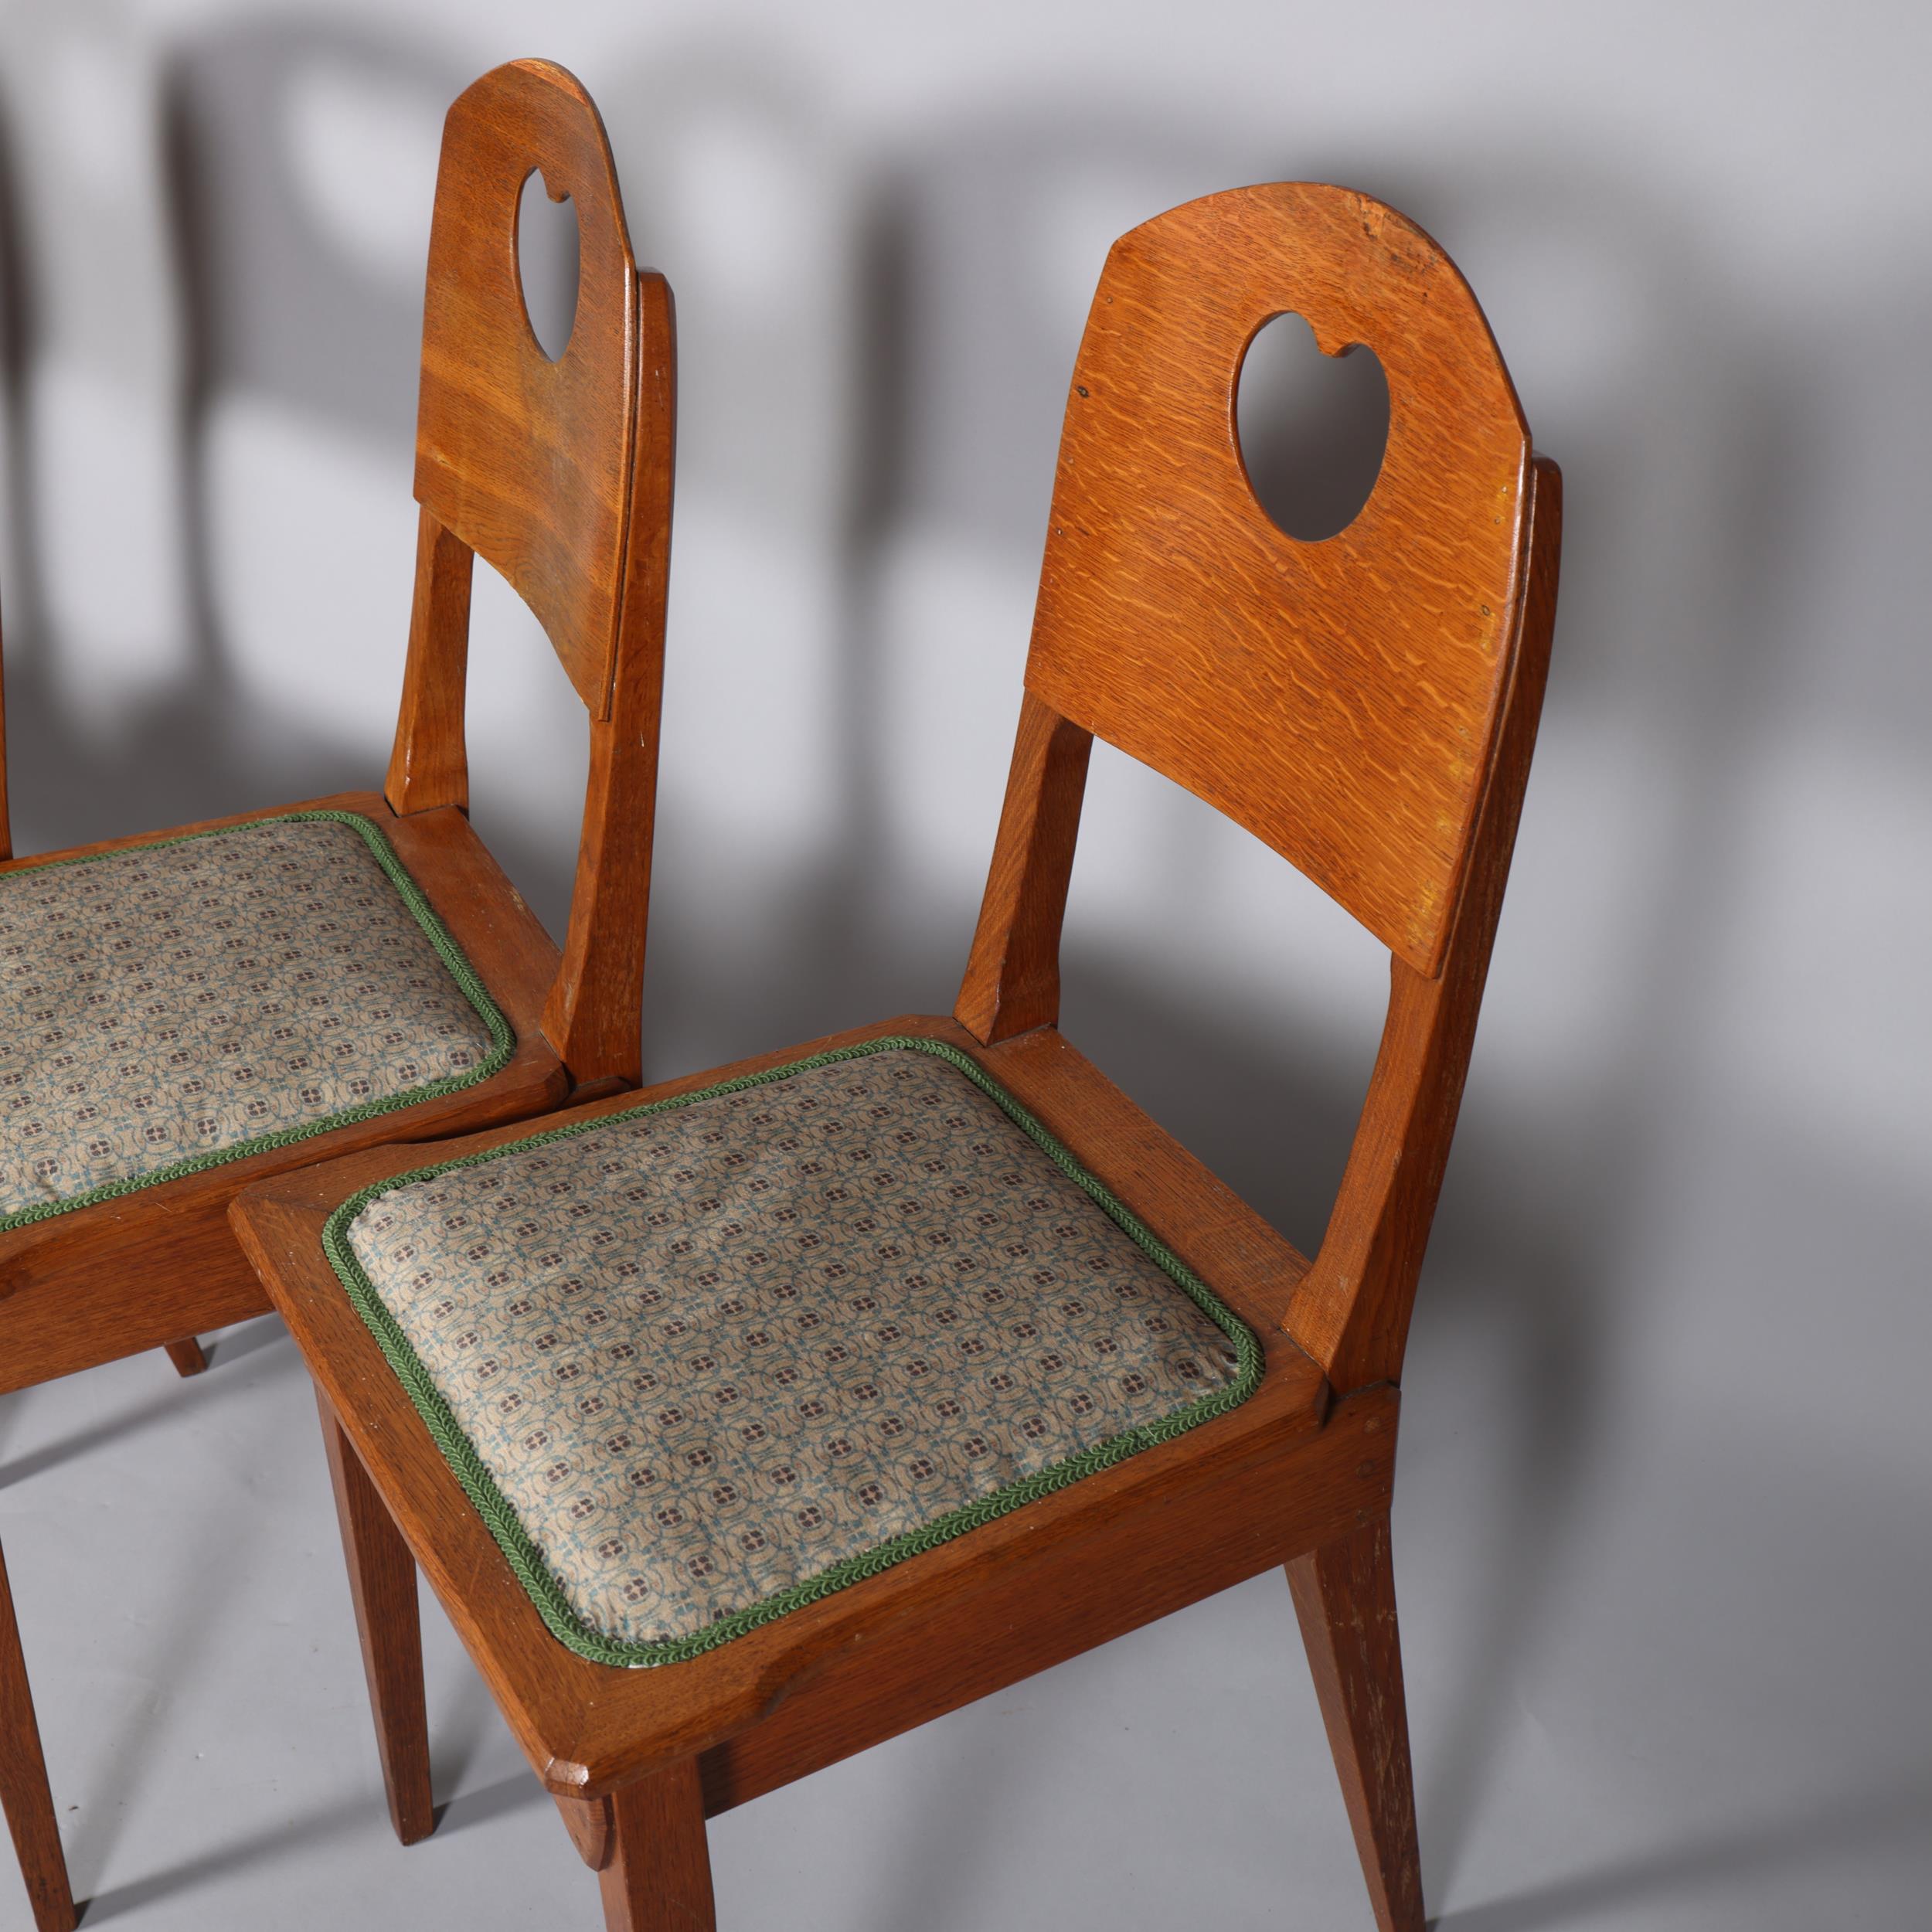 RICHARD RIEMERSCHMID (1868 - 1957), a set of 4 Arts and Crafts or Jugendstil chairs made by - Image 2 of 11